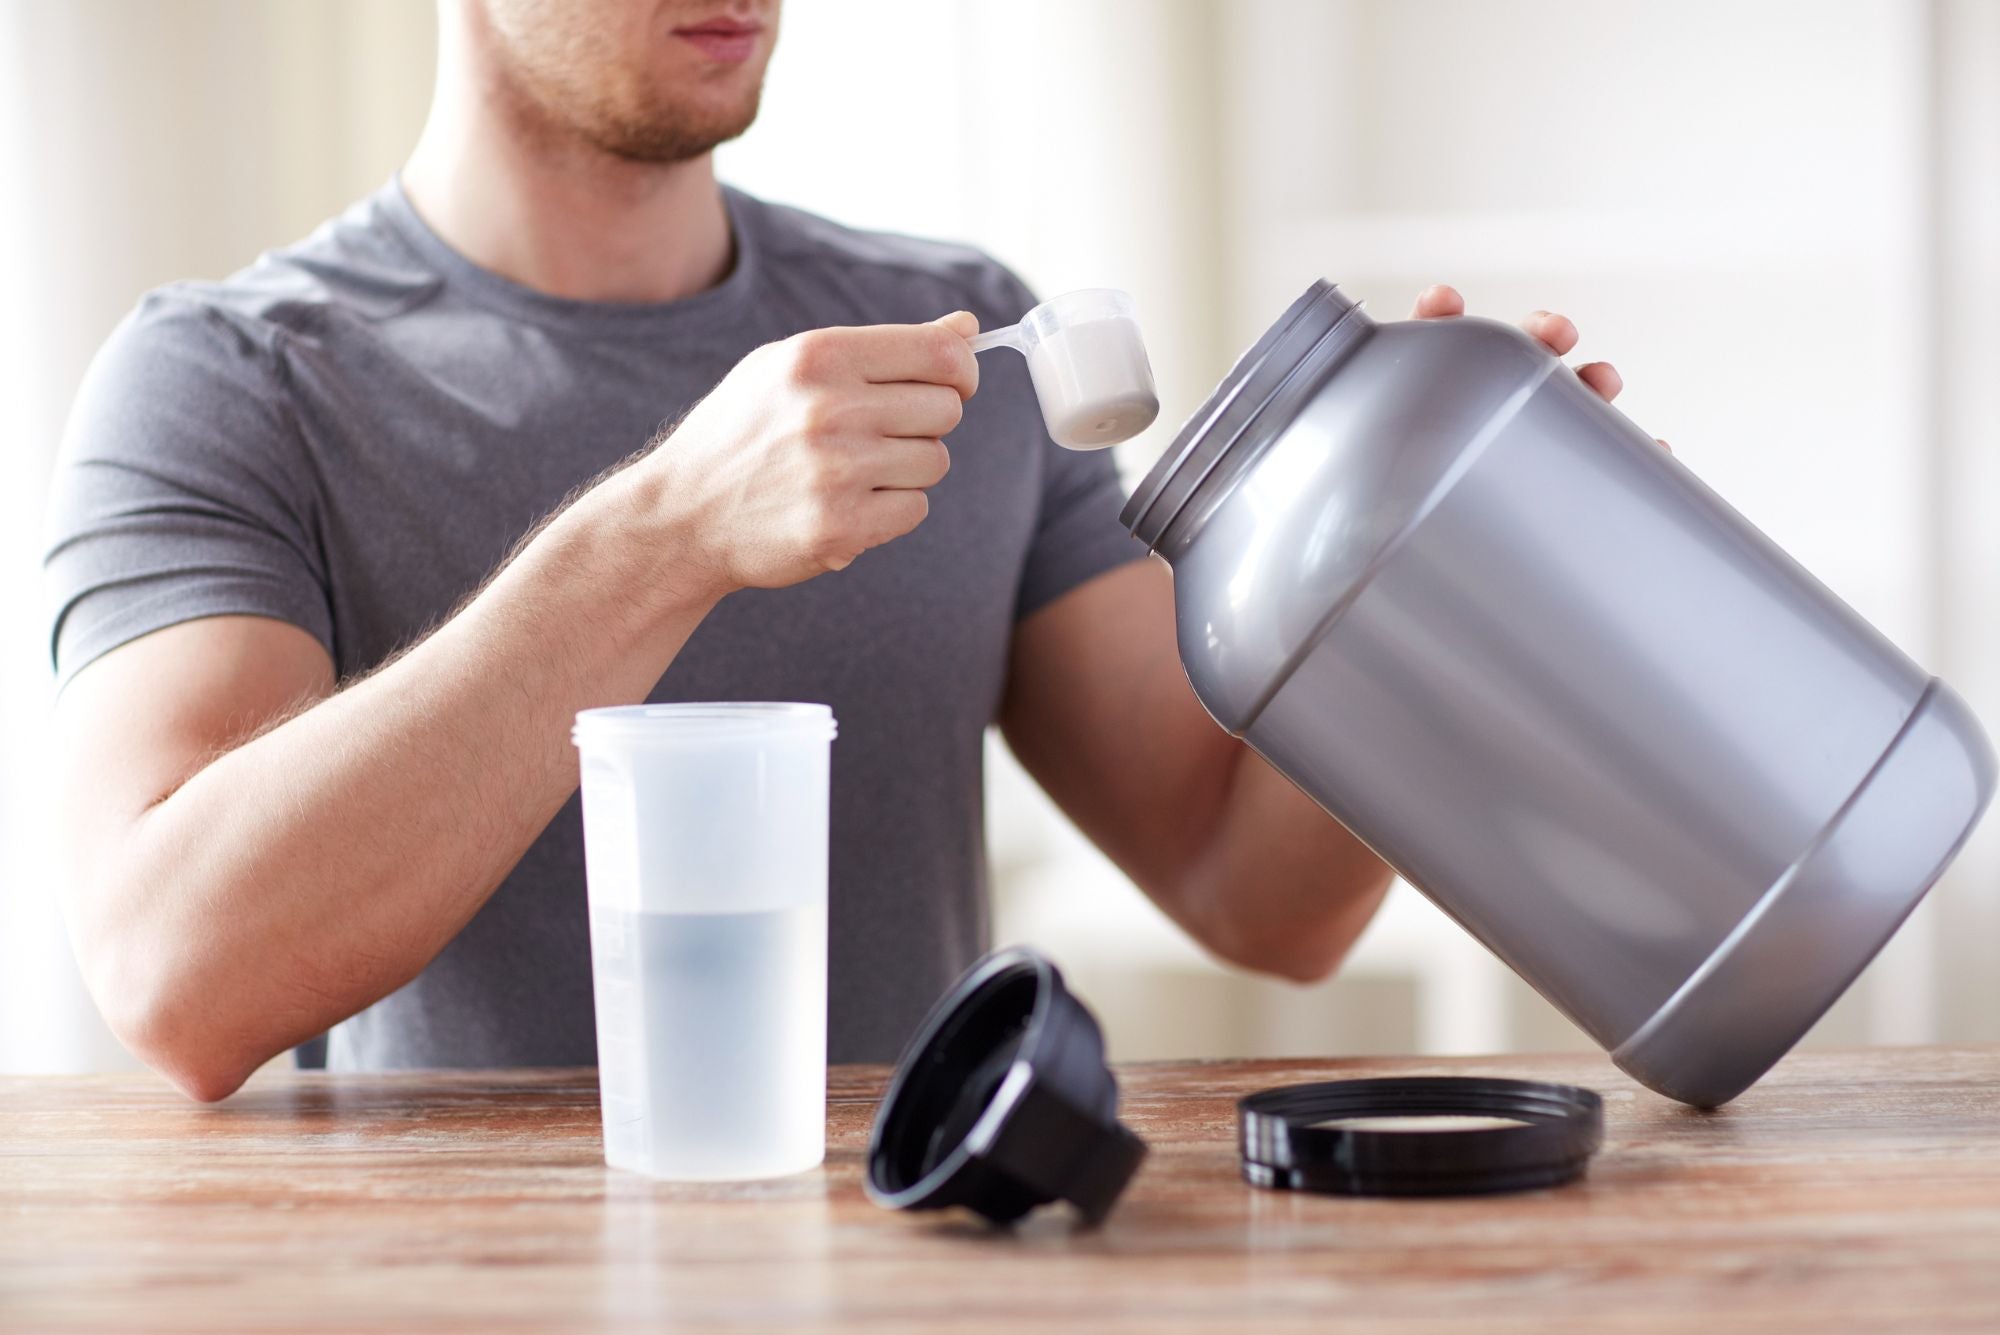 A muscular man scoops creatine into his shaker before going to the gym, but wonders whether creatine can cause acne.